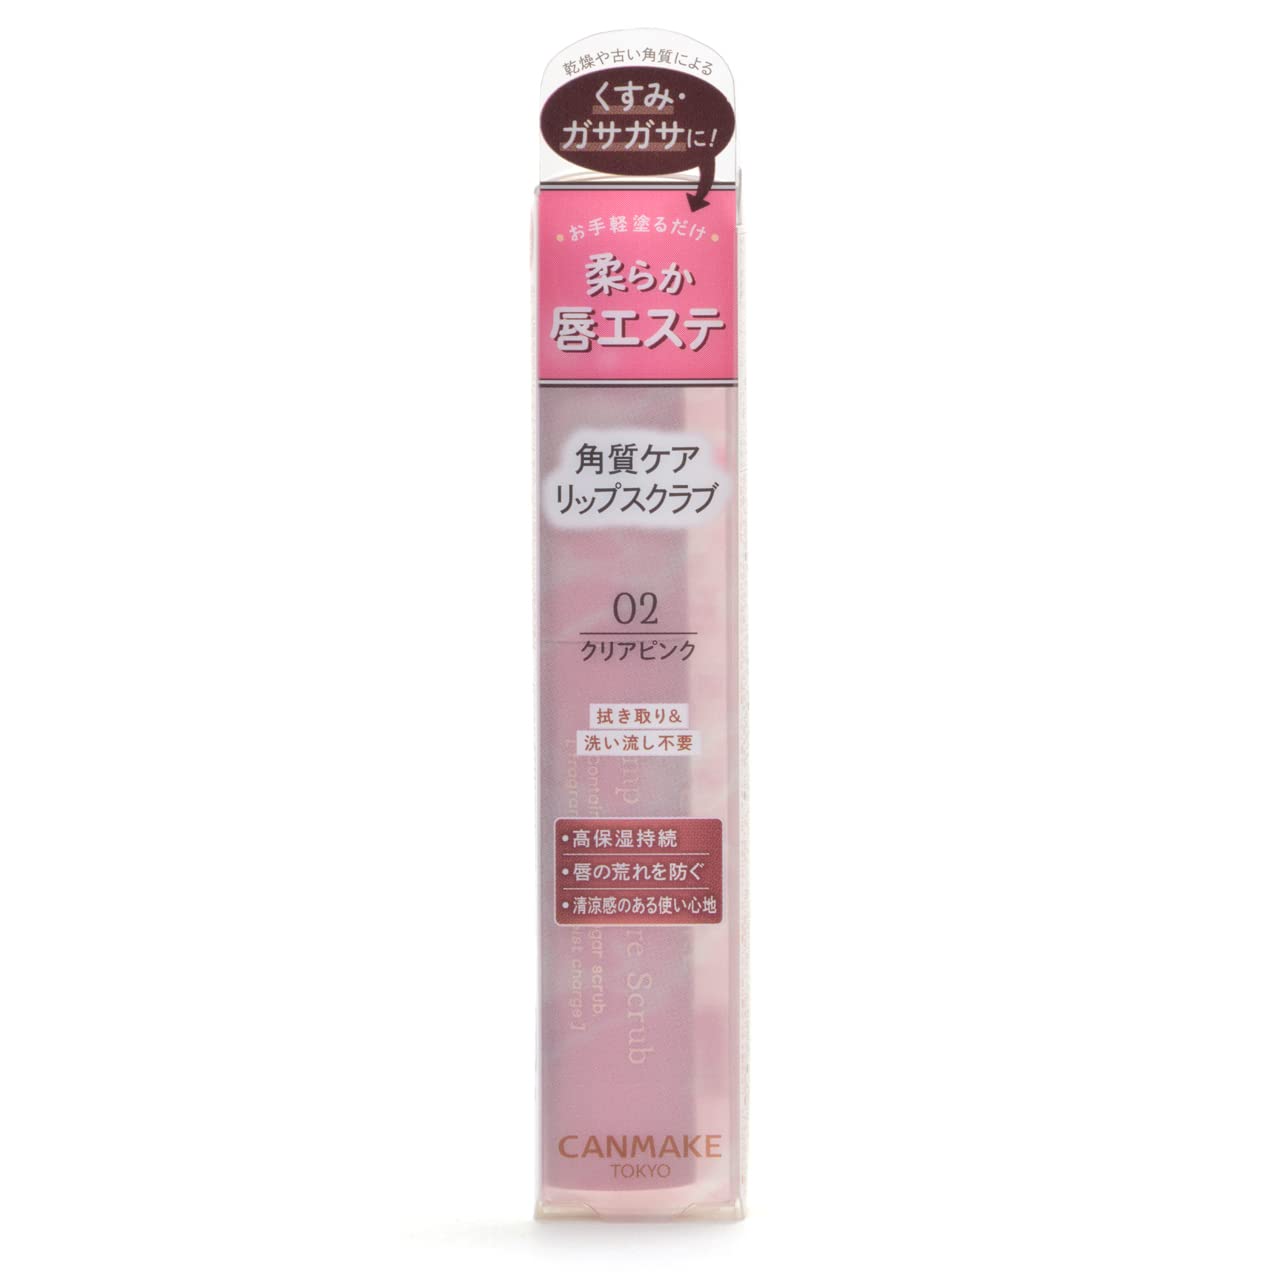 Canmake Plump Lip Care Scrub 02 Clear Pink Lip Care Highly Moisturizing Sugar Scrub Complexion No Rinse Required - YOYO JAPAN